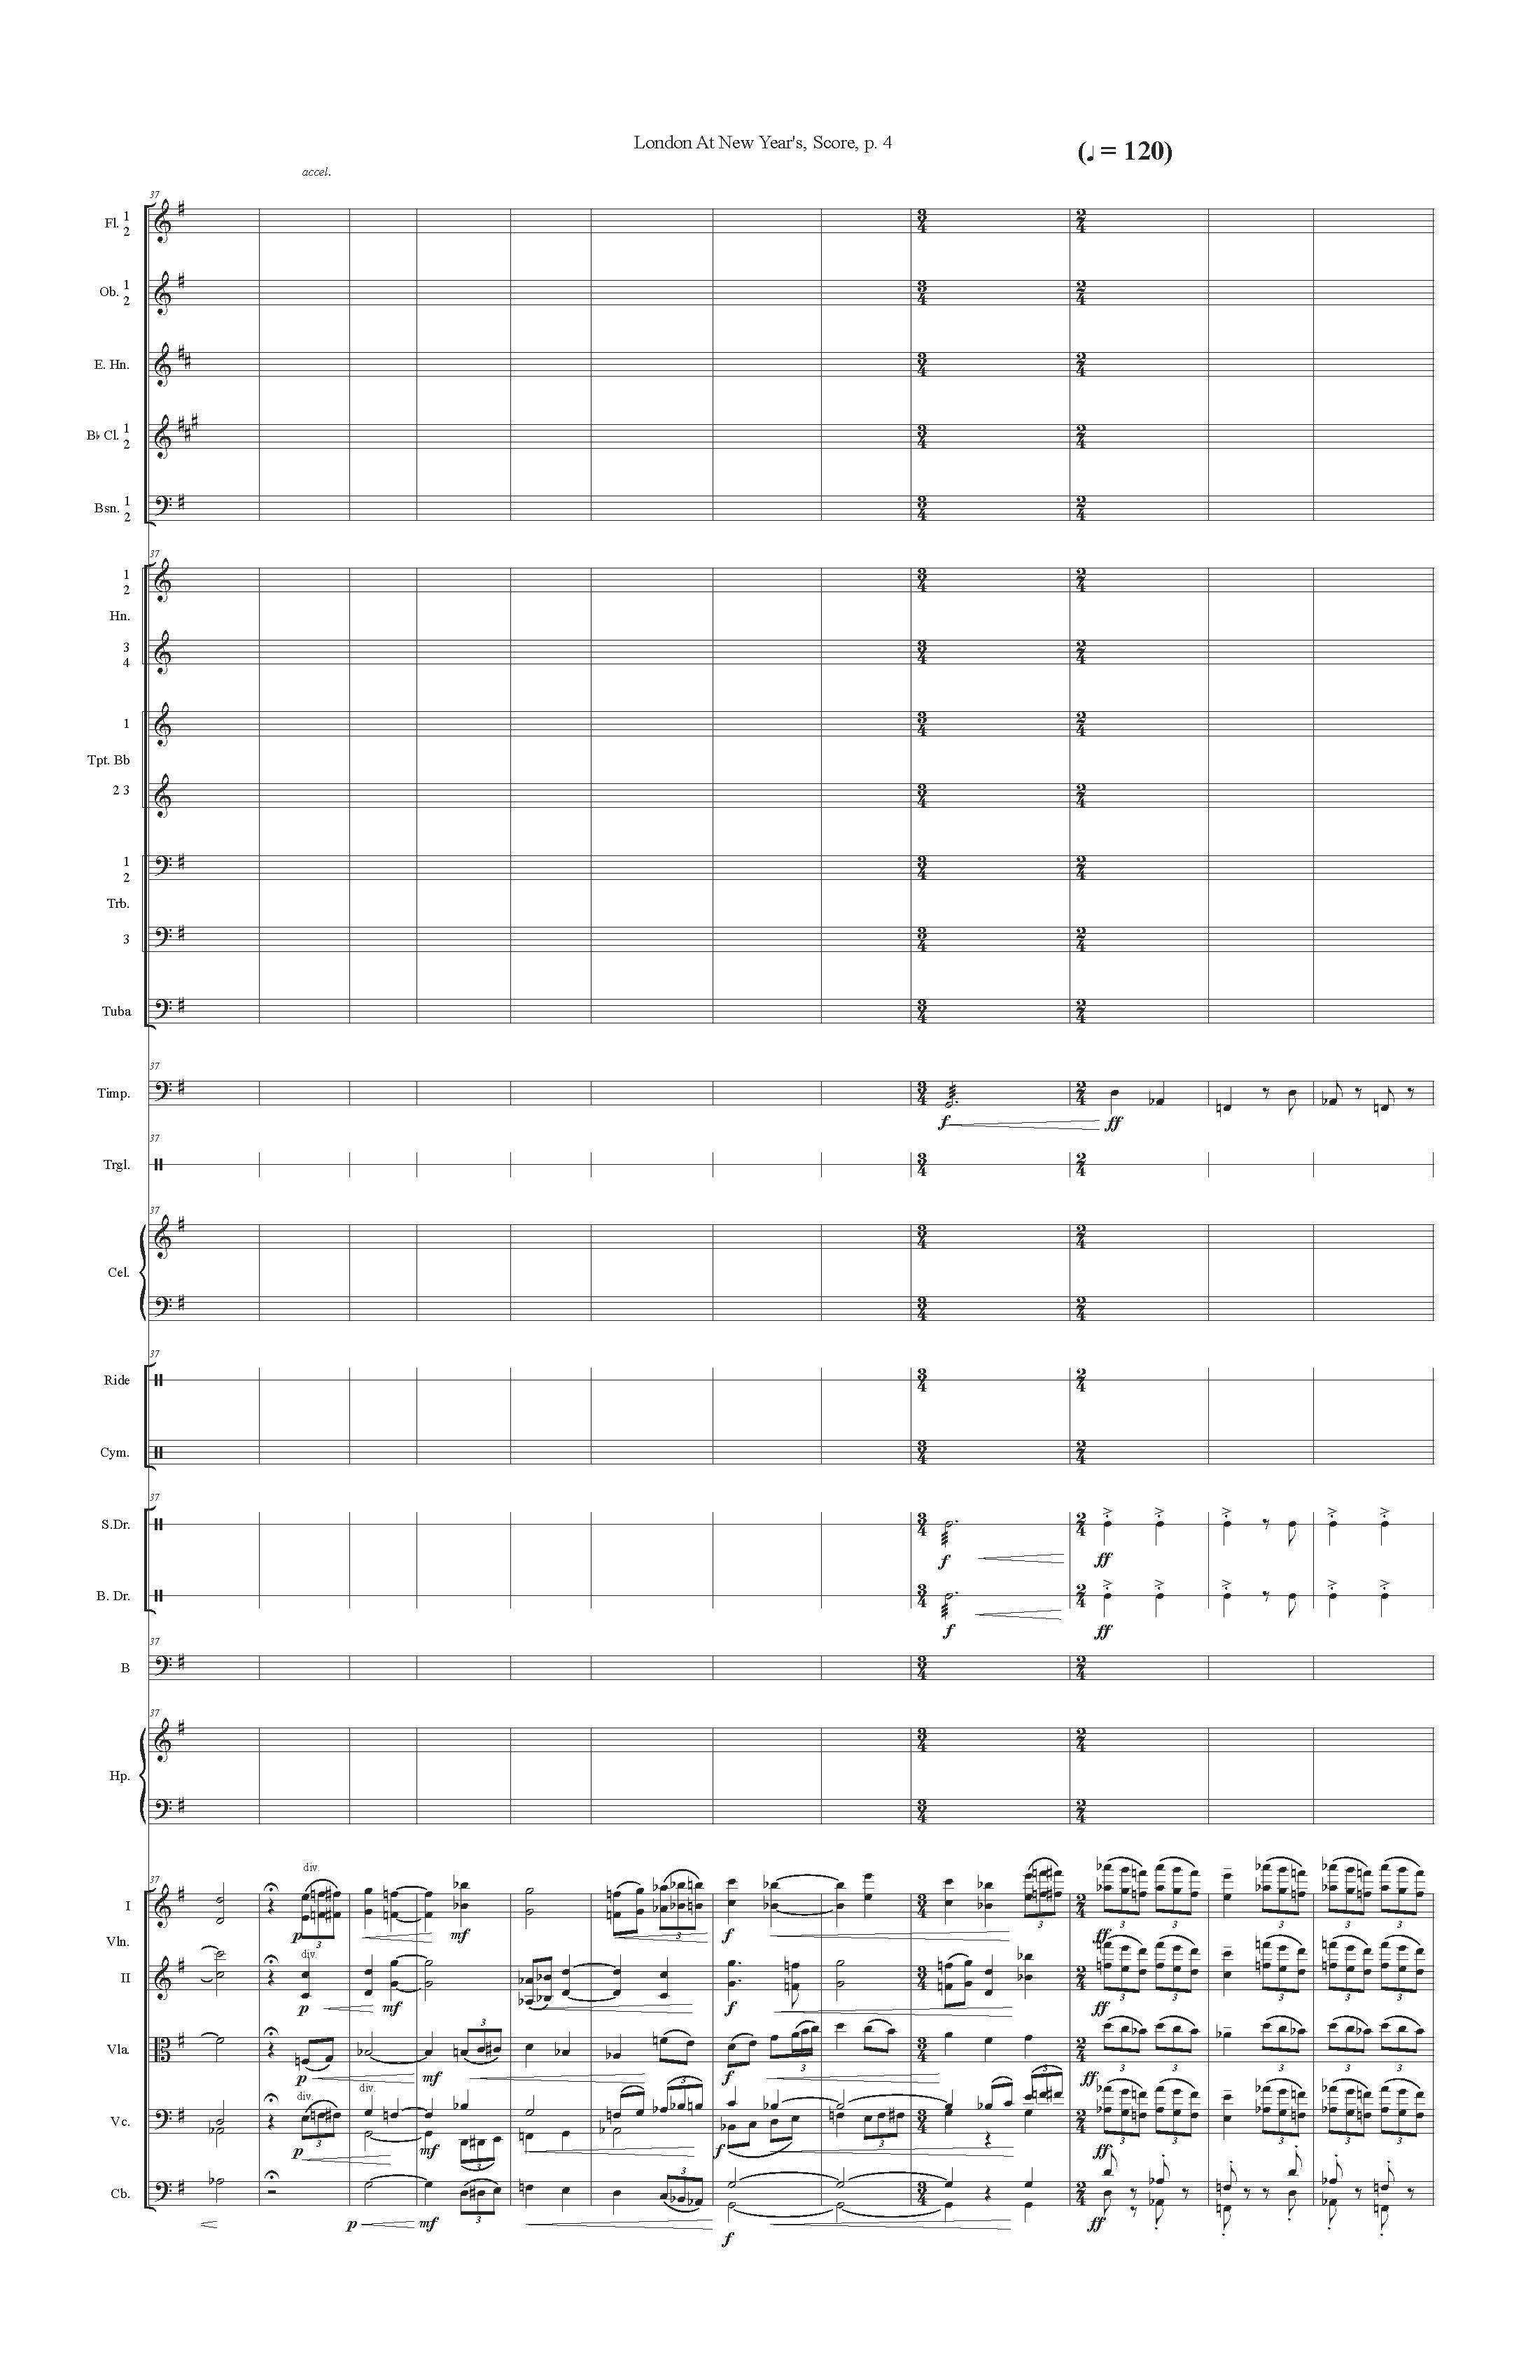 LONDON AT NEW YEARS ORCH - Score_Page_04.jpg